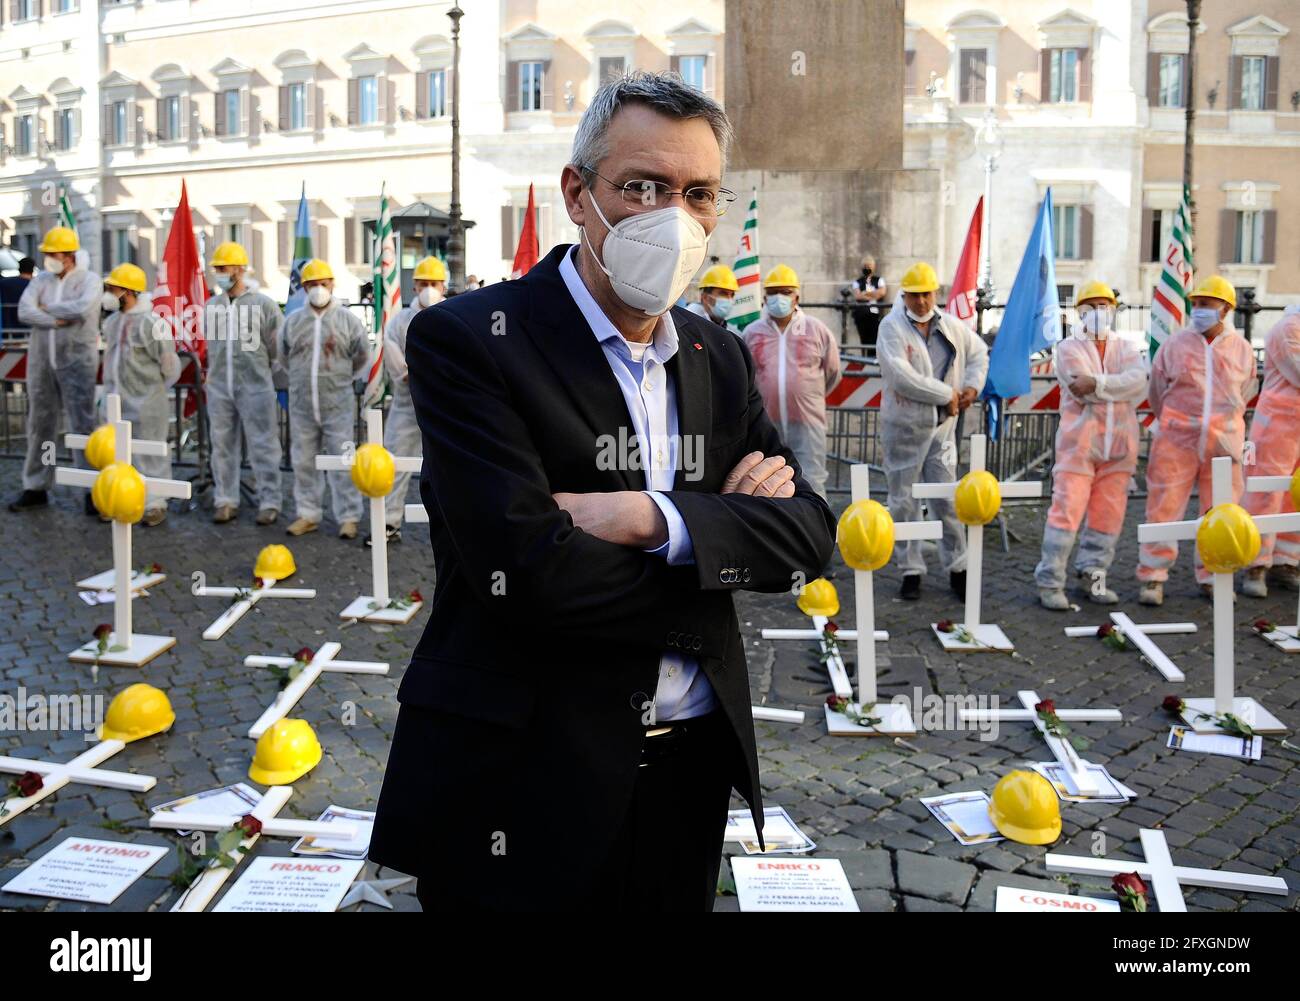 Italy, Rome, may 26, 2021 : Cgil Cisl Uil trade union demonstration against deaths at work, in front of italian Parliament. Pictured Maurizio Landini secretary of the CGIL trade union.   Photo © Fabio Cimaglia/Sintesi/Alamy Live News Stock Photo